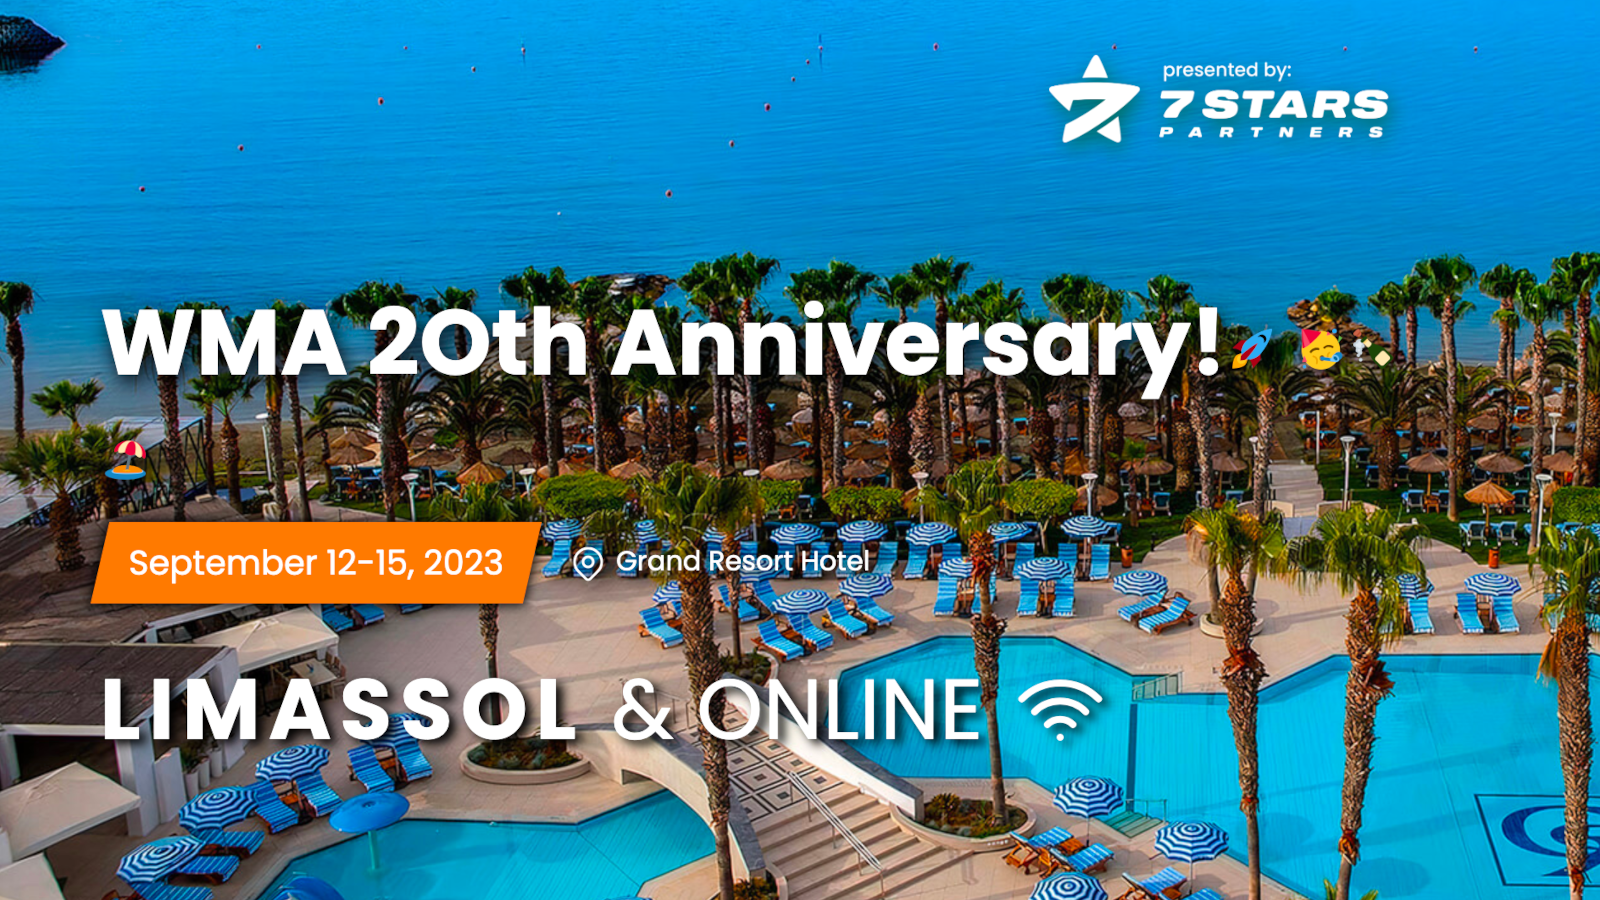 Webmaster Access to Celebrate 20th Anniversary in Limassol